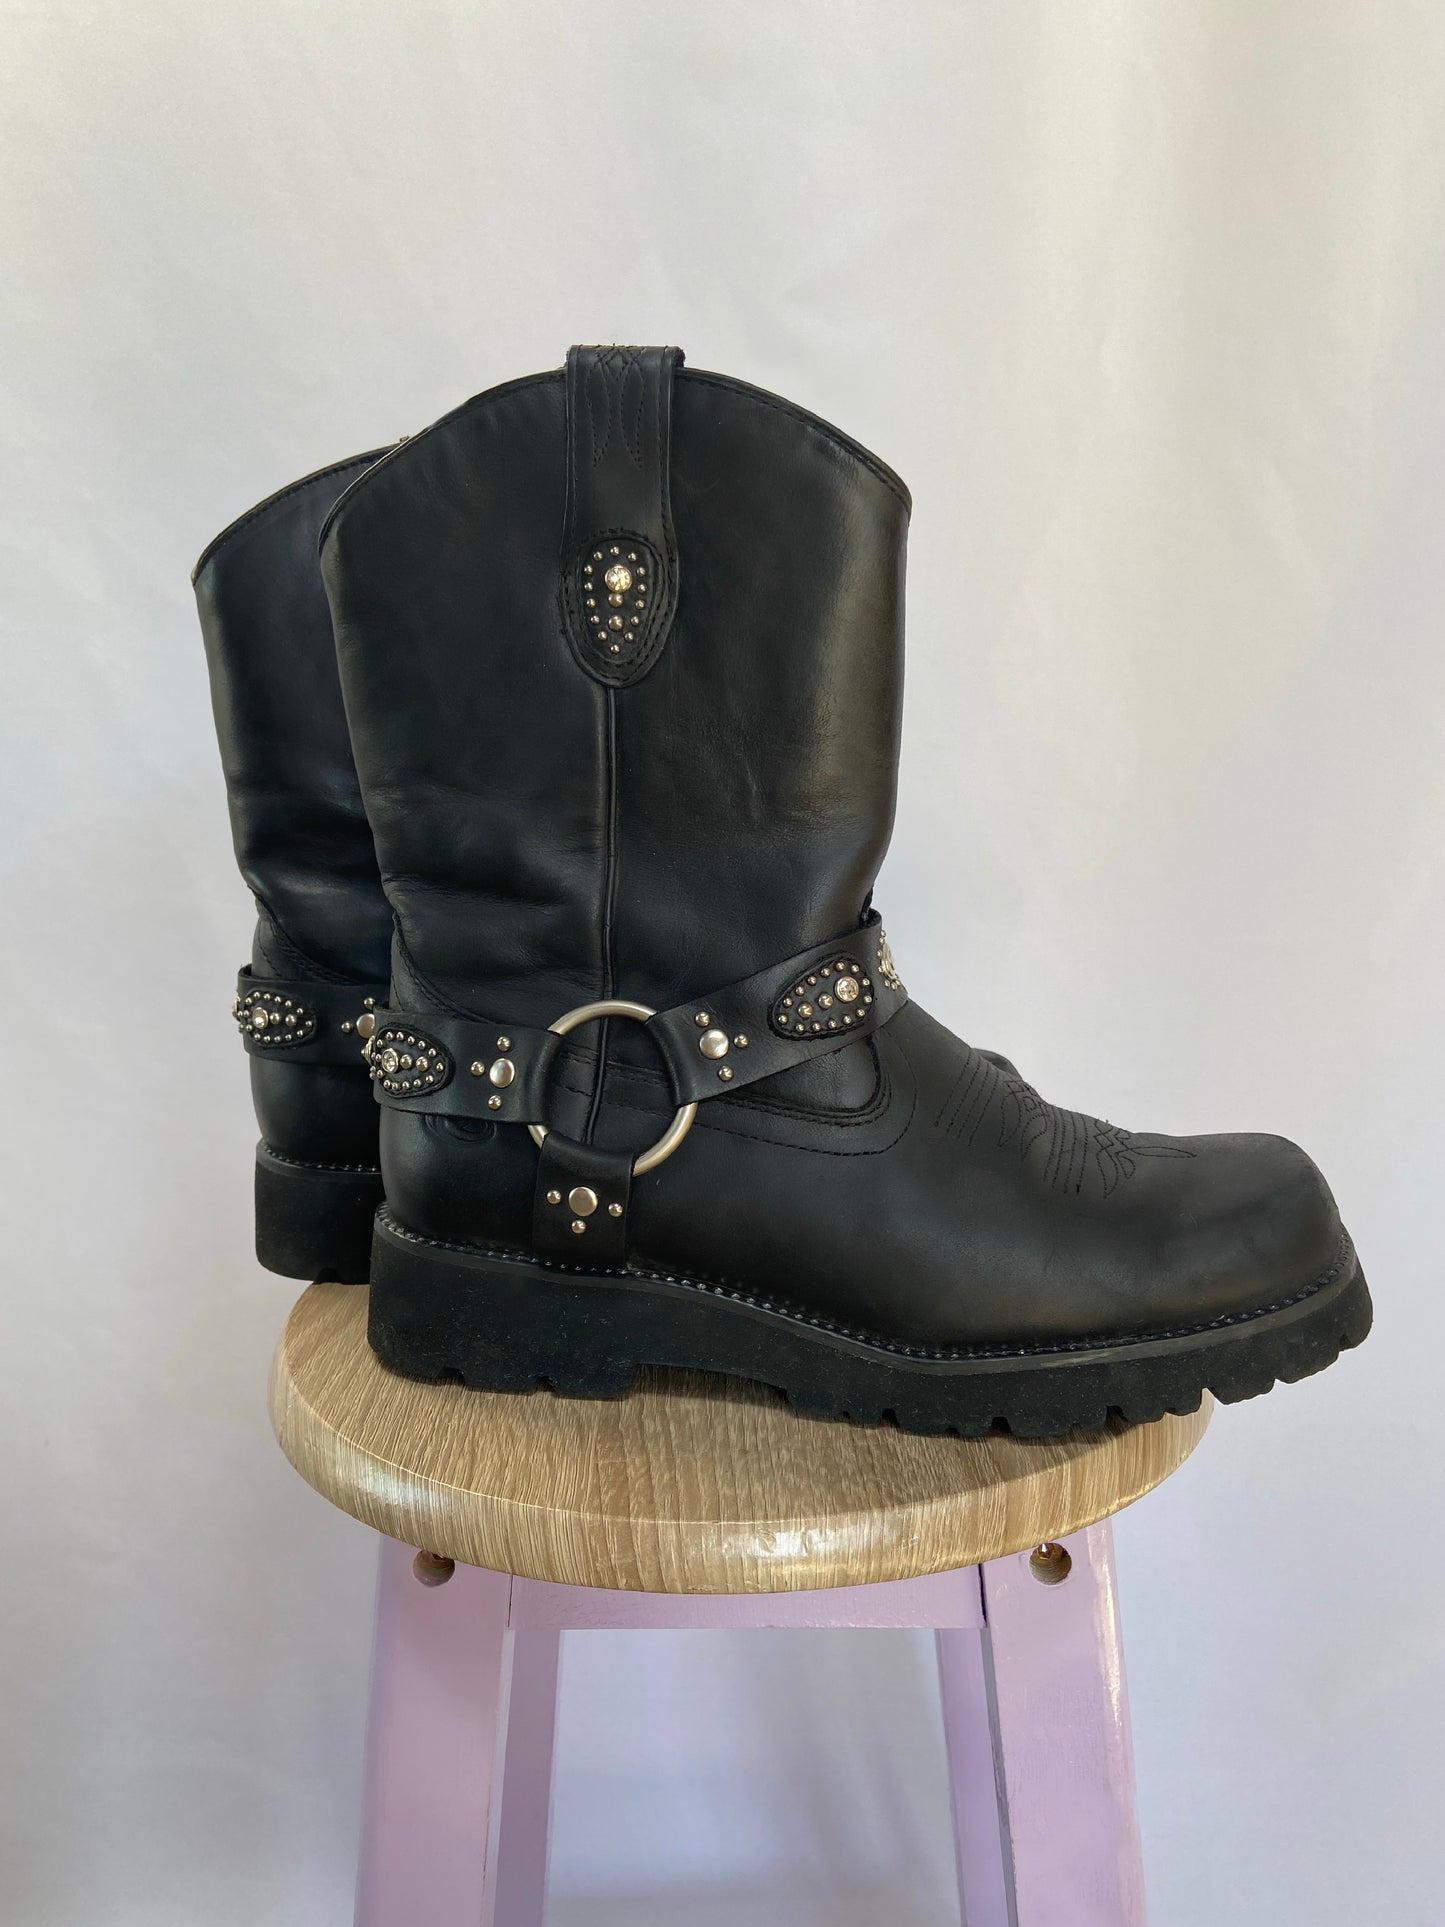 Black Leather Roper Boots - 8